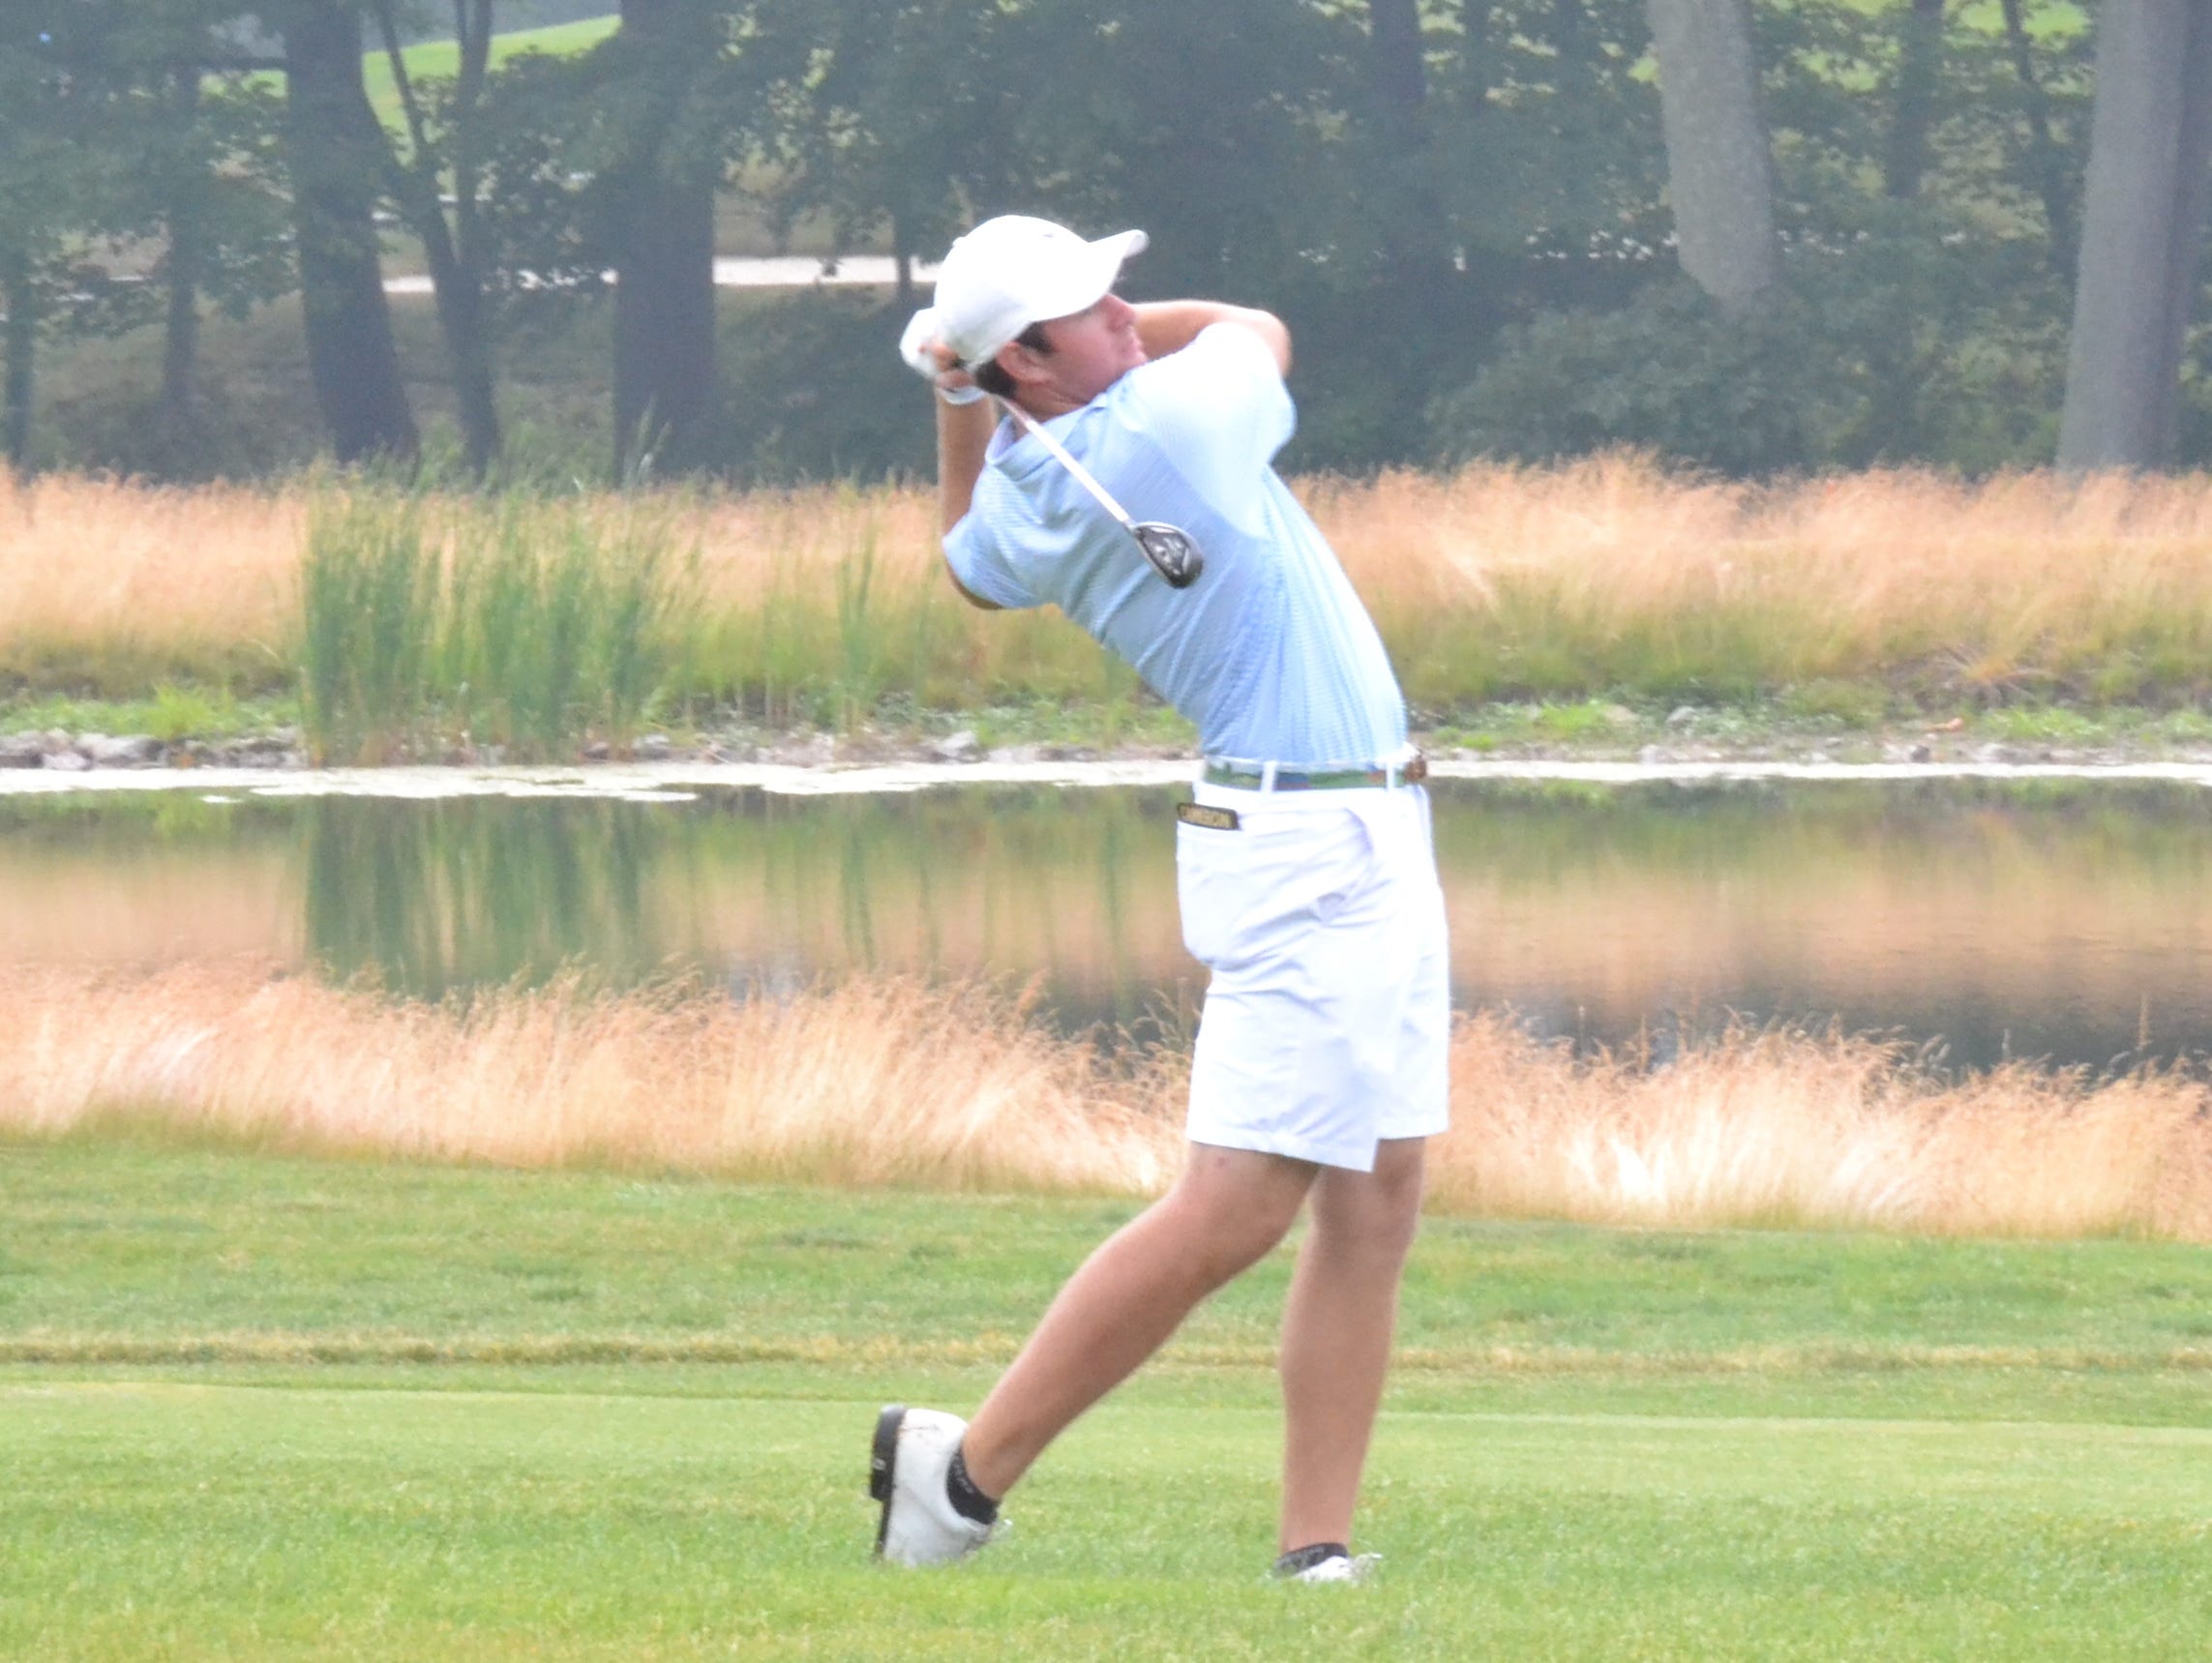 Scarborough resident Cameron Young will be making a fourth appearance in the U.S. Amateur Championship next month at Oakland Hills.